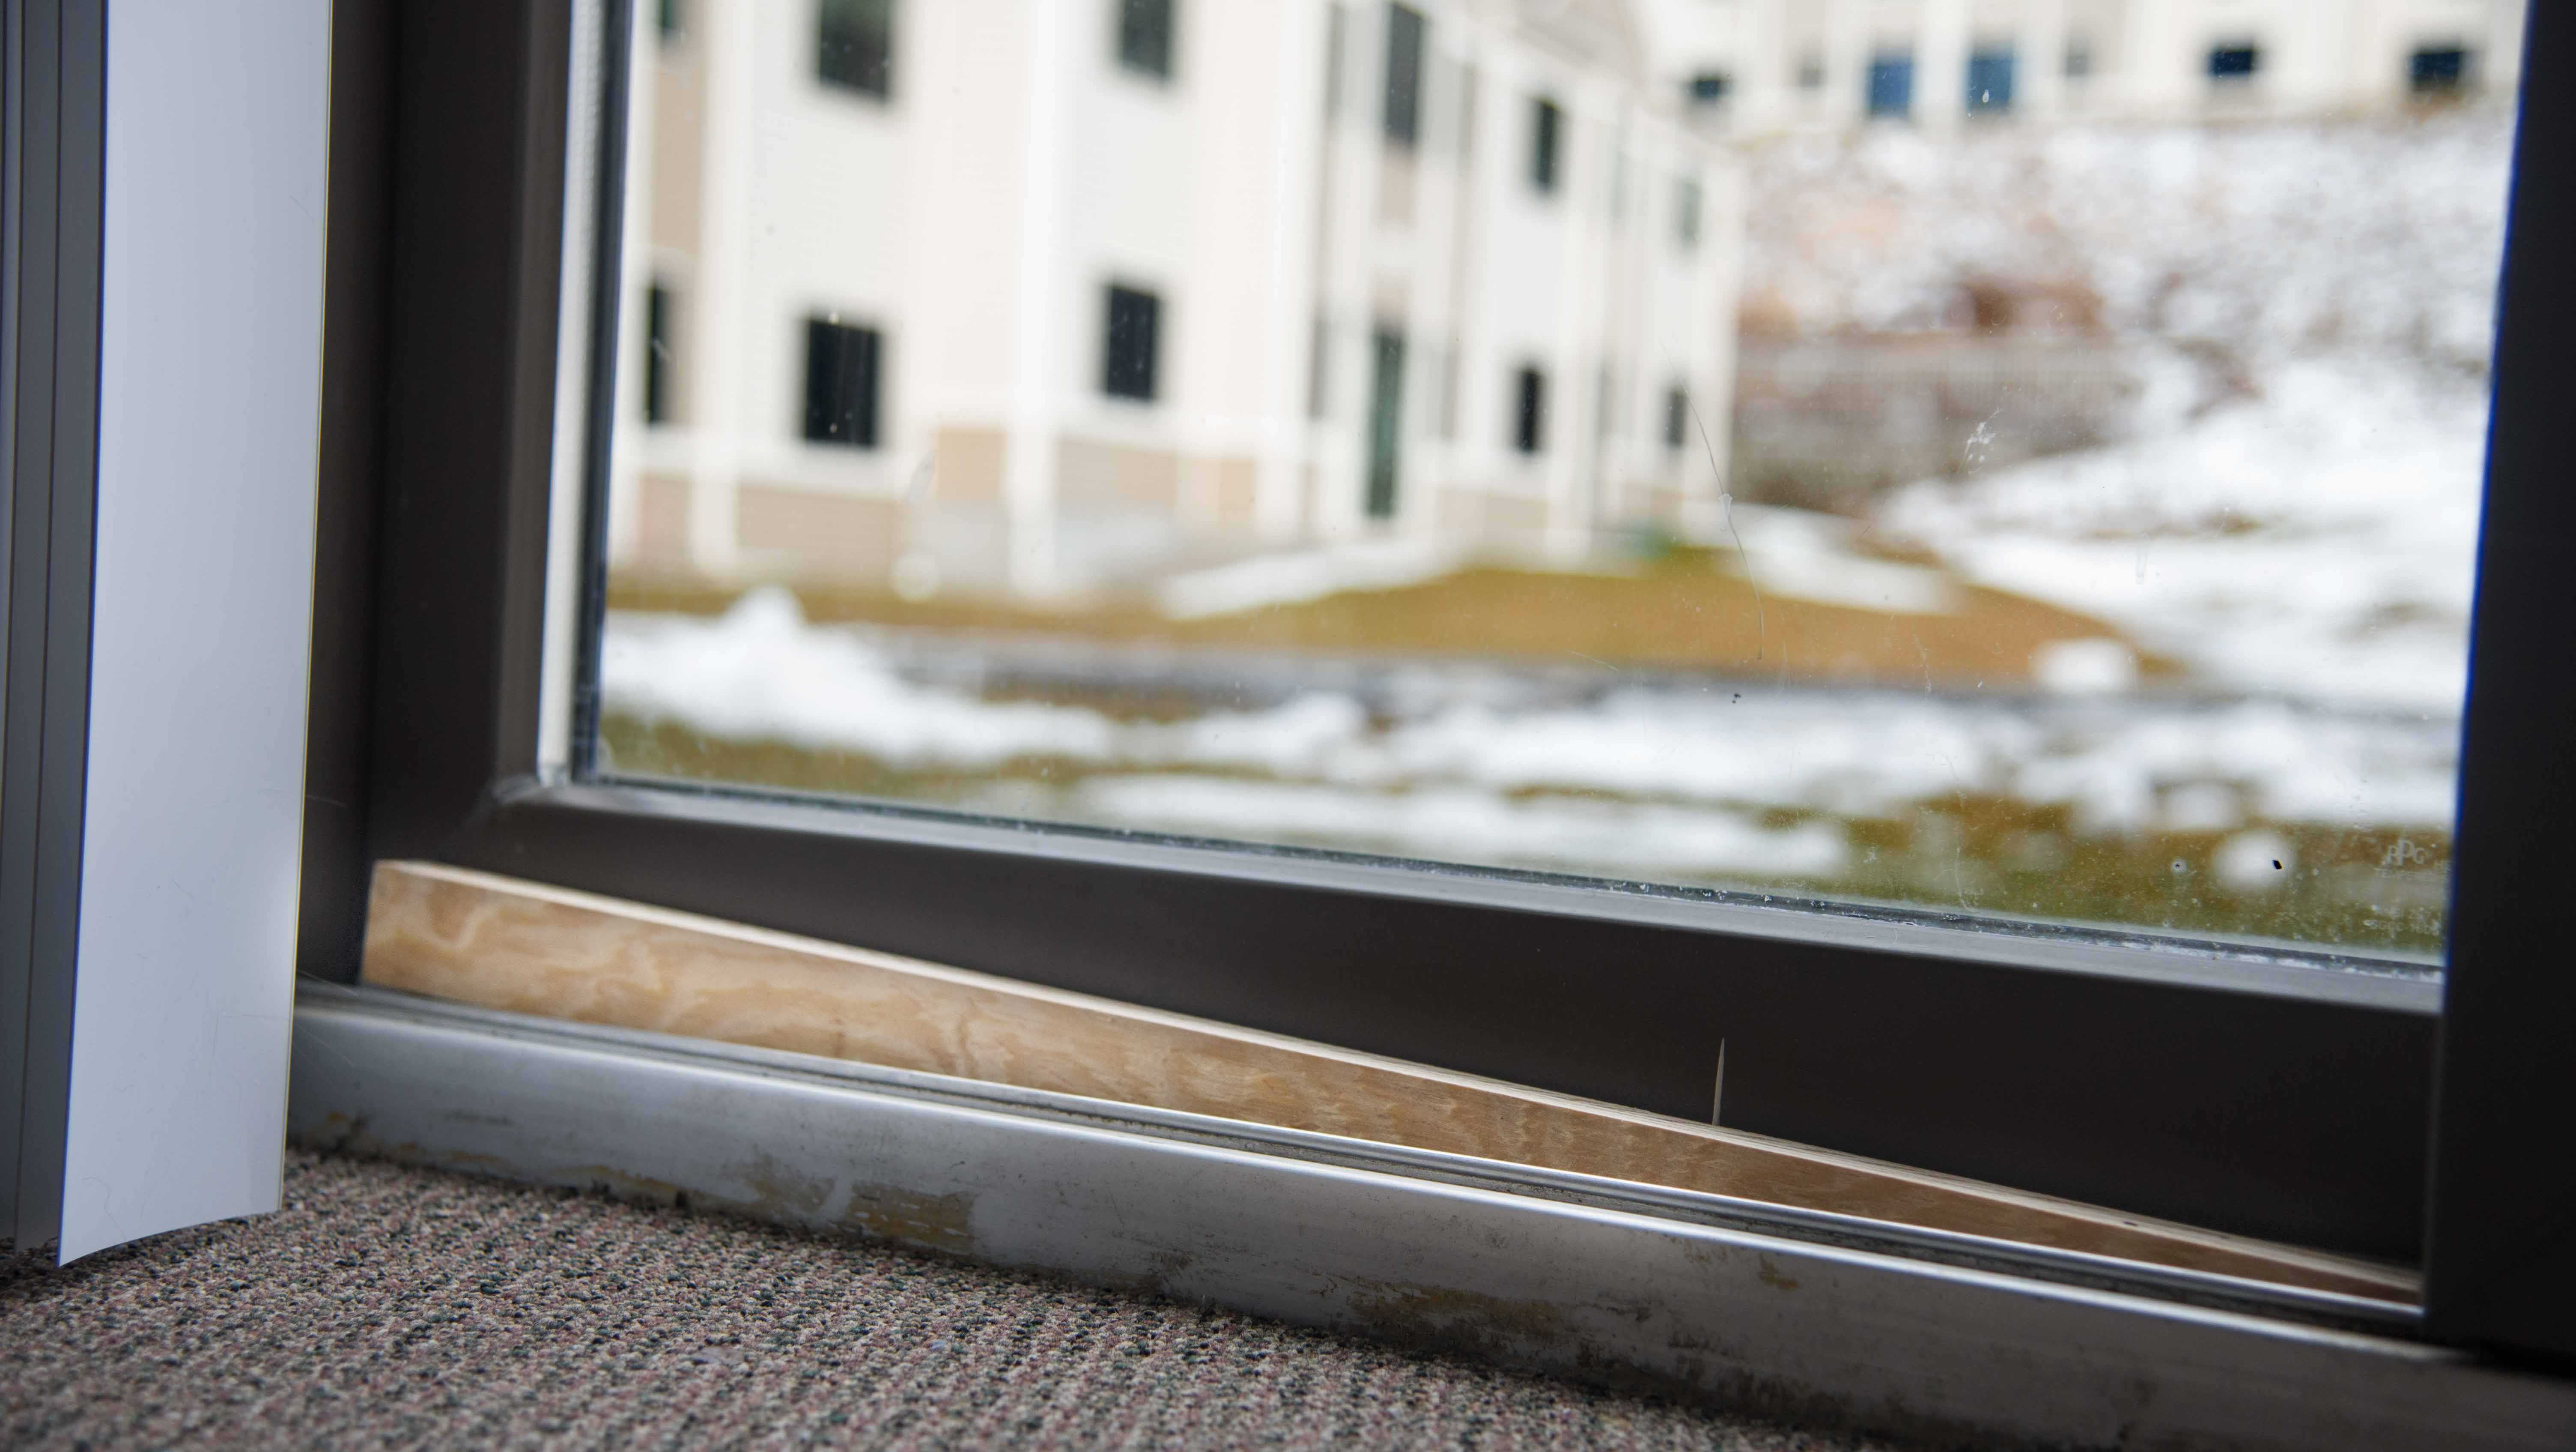 Preventative measures recommended to students after break-ins